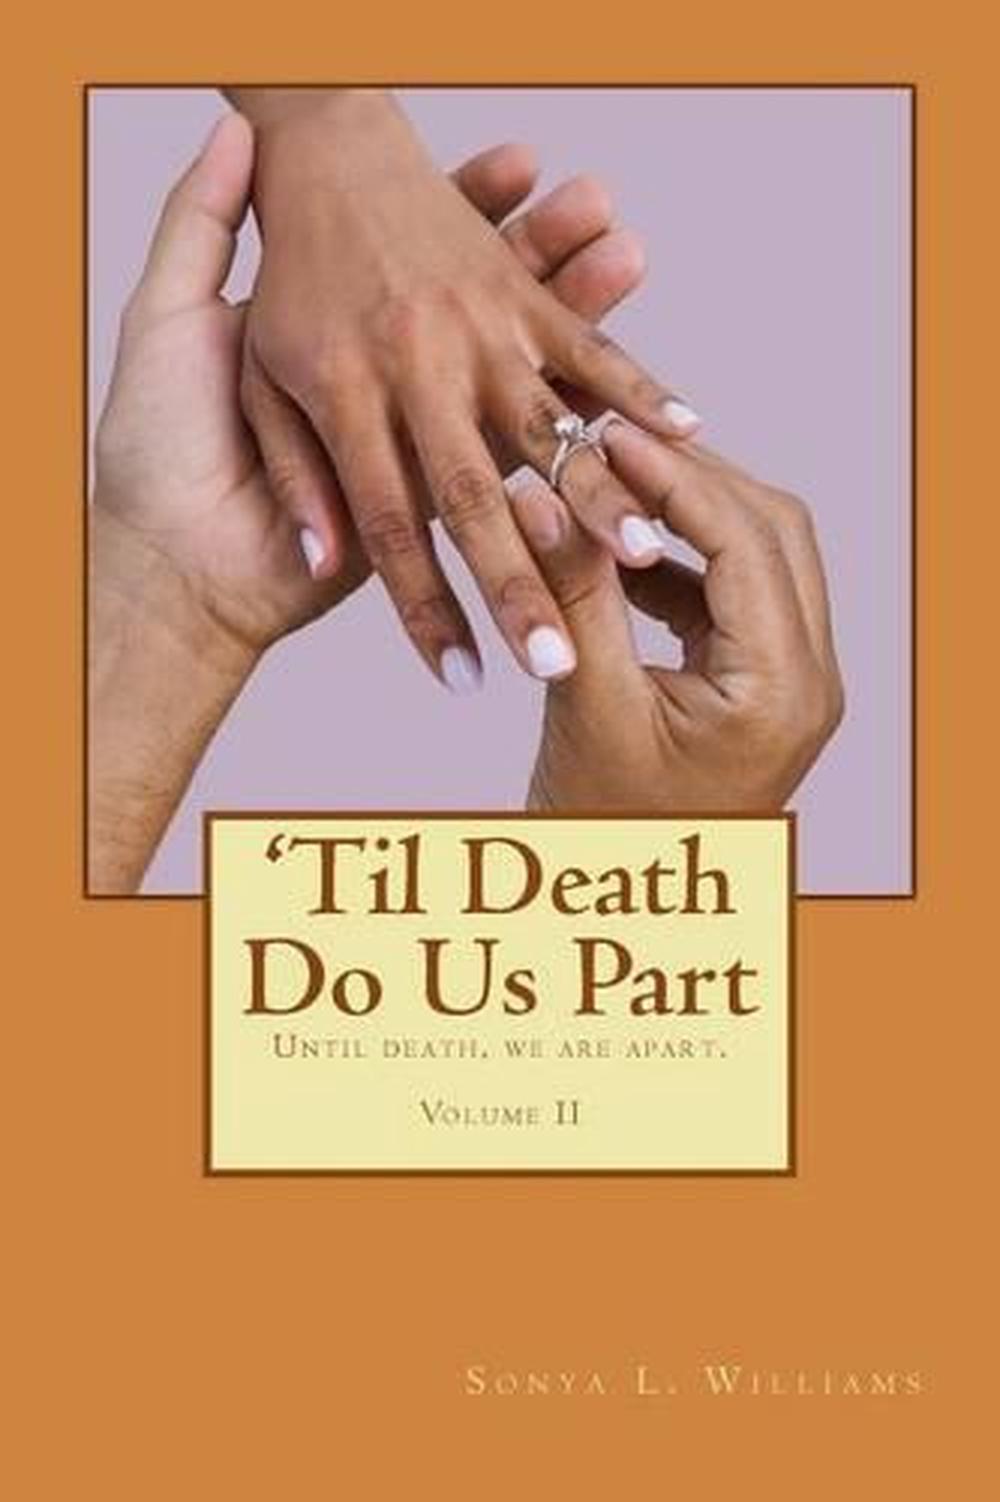 When Other People Saw Us, They Saw the Dead by Lauren T.Davila